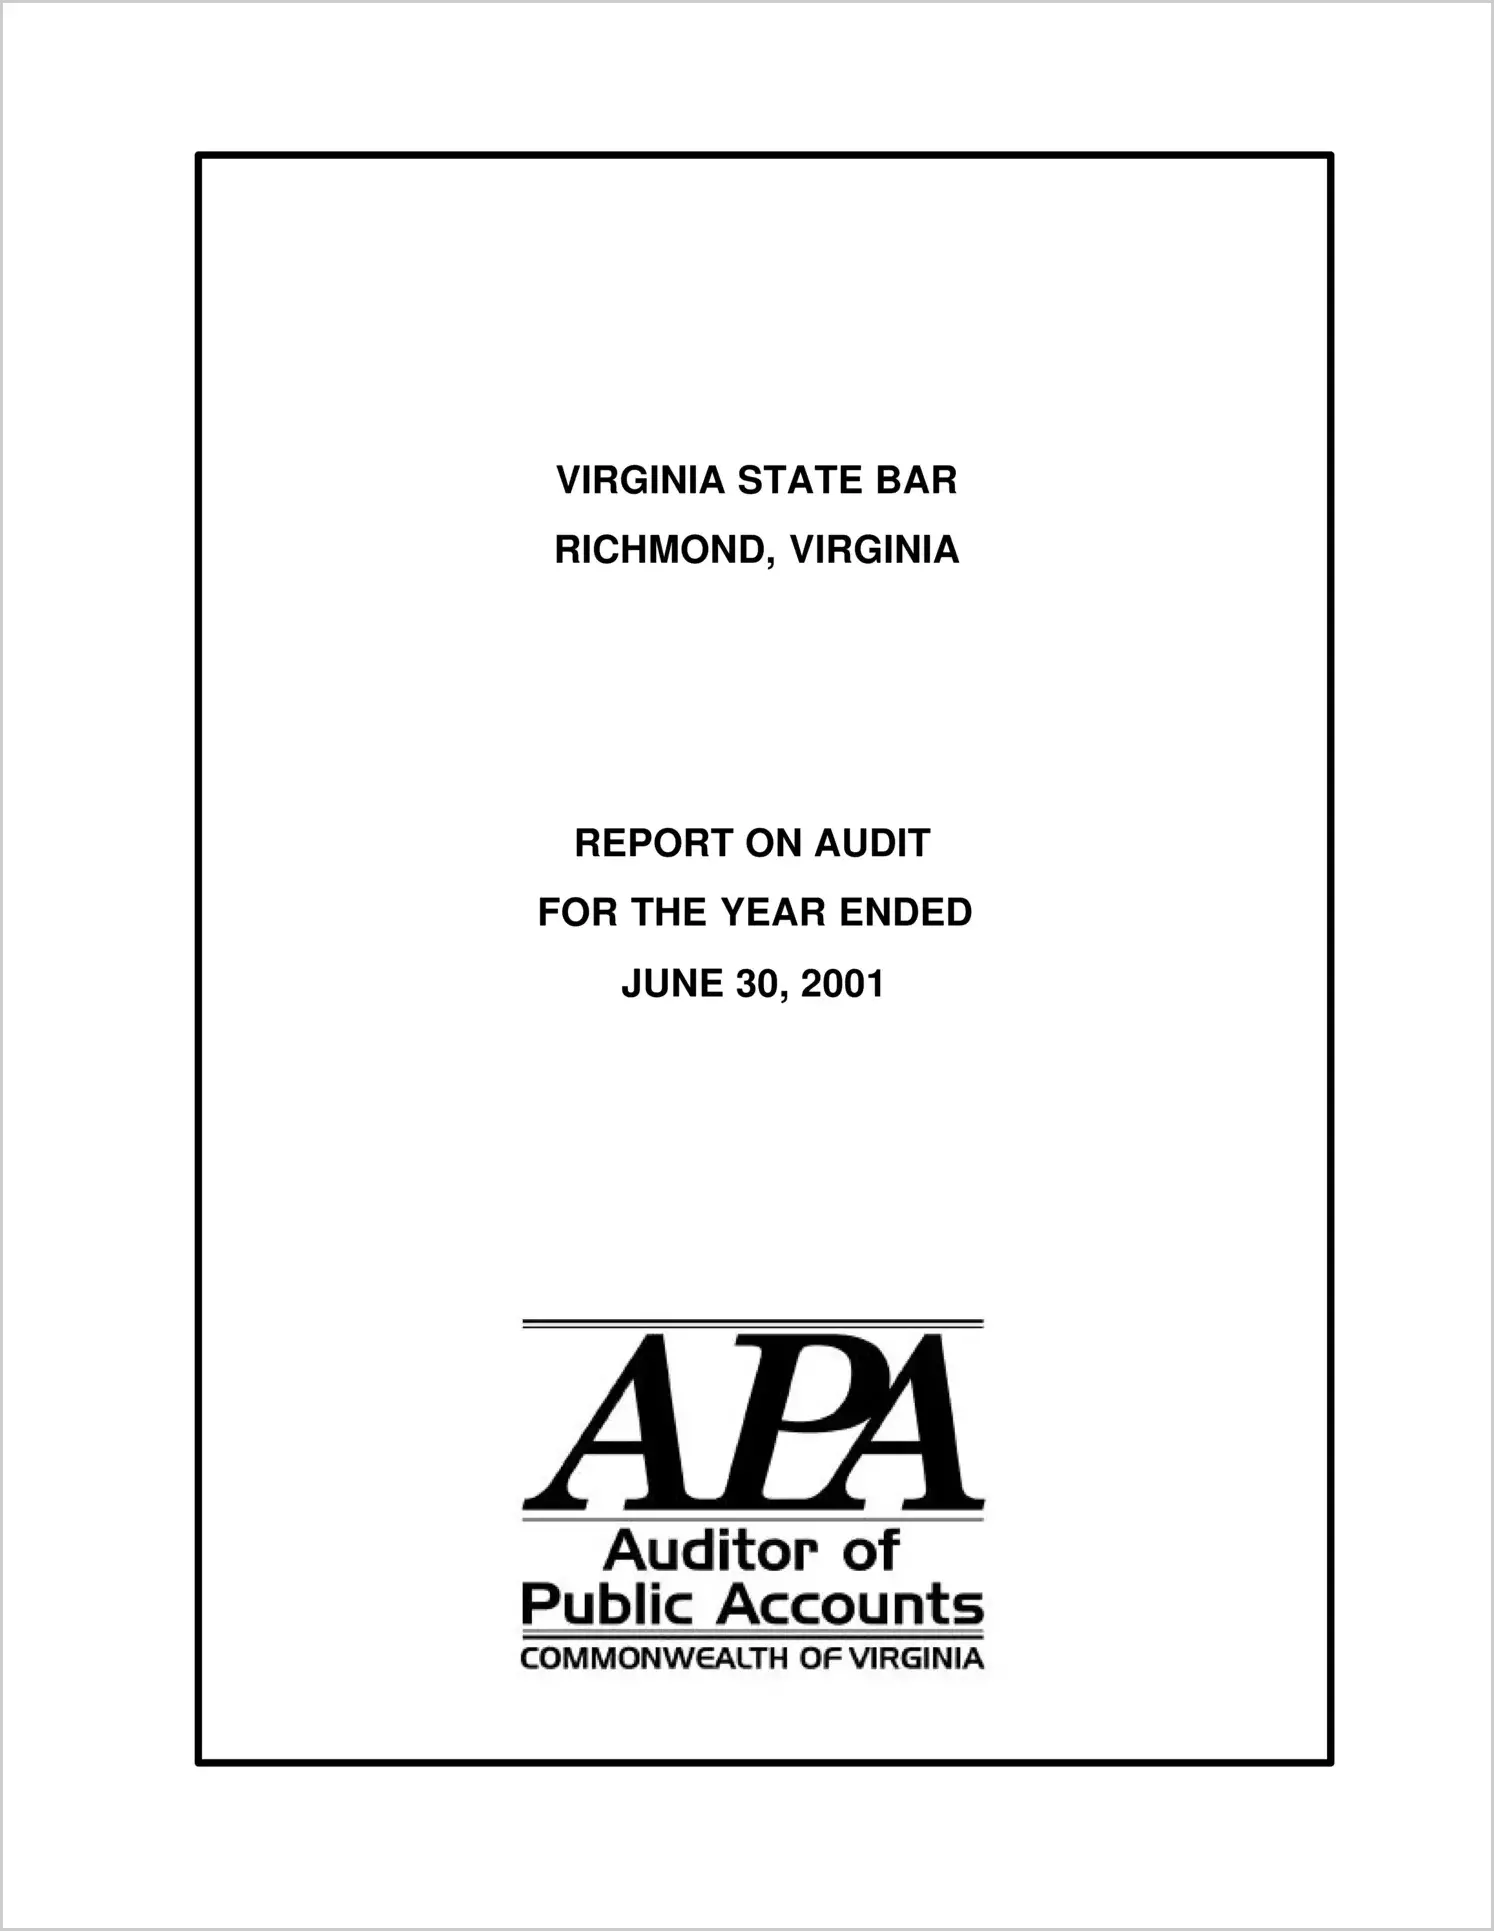 Virginia State Bar for the year ended June 30, 2001